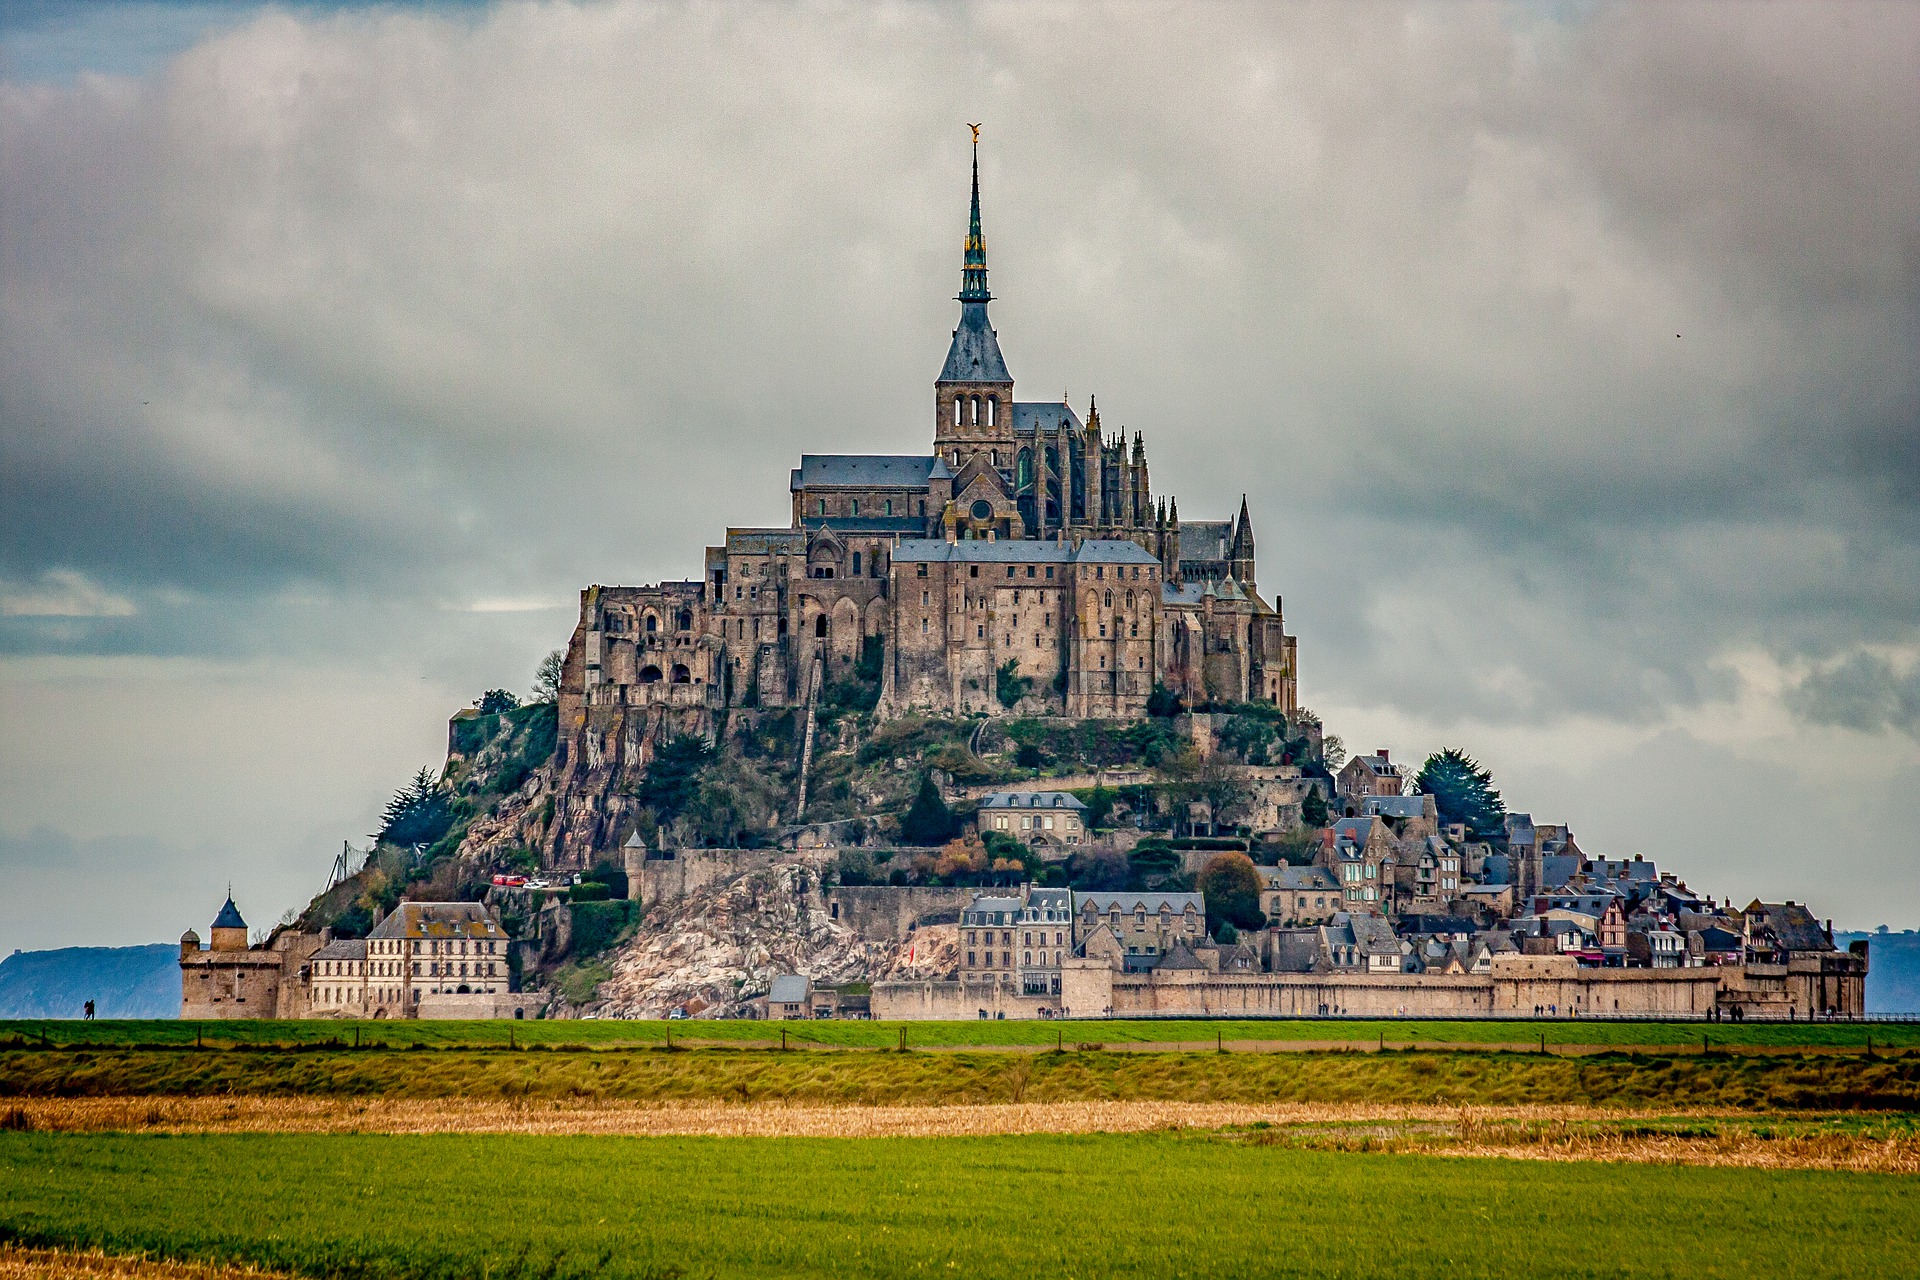 MONT ST MICHEL, NORMANDY SEEN FROM THE MAINLAND